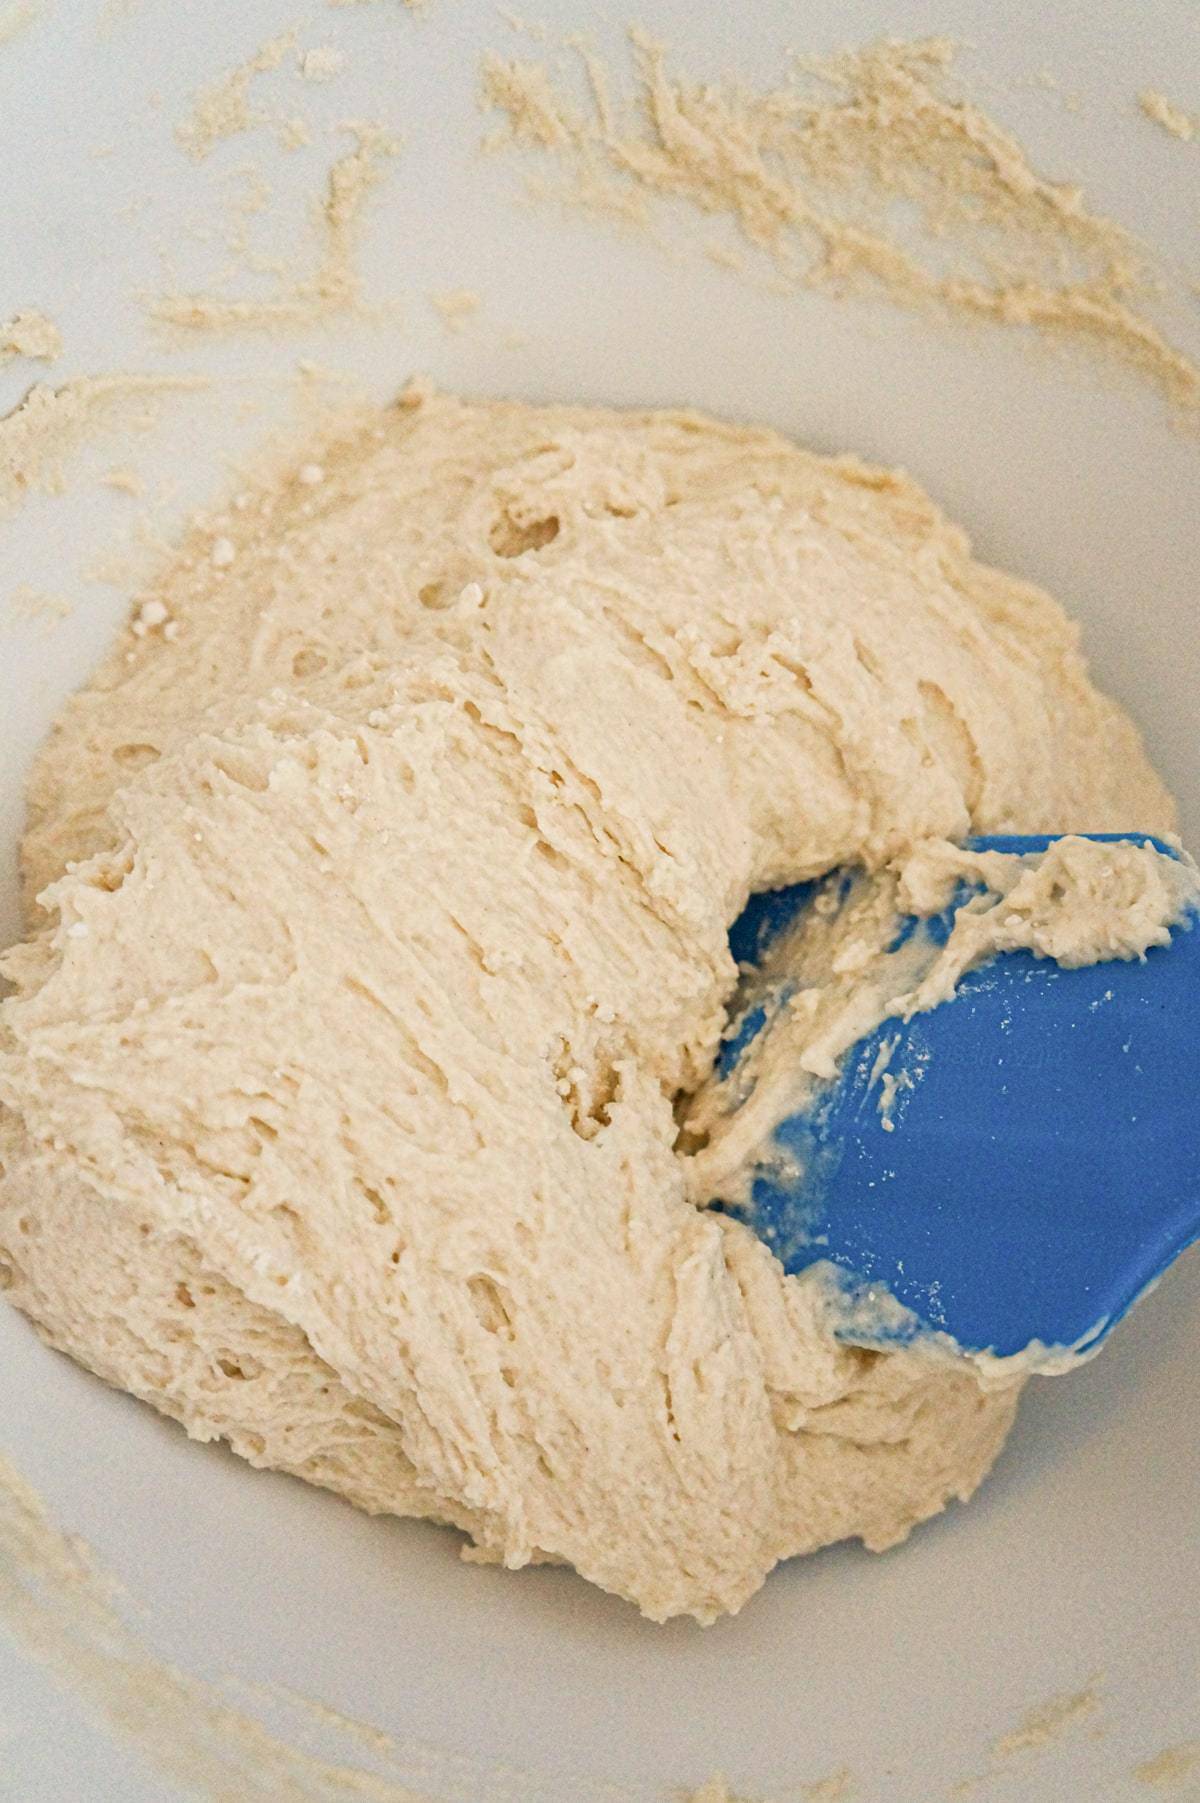 Bisquick dough in a mixing bowl